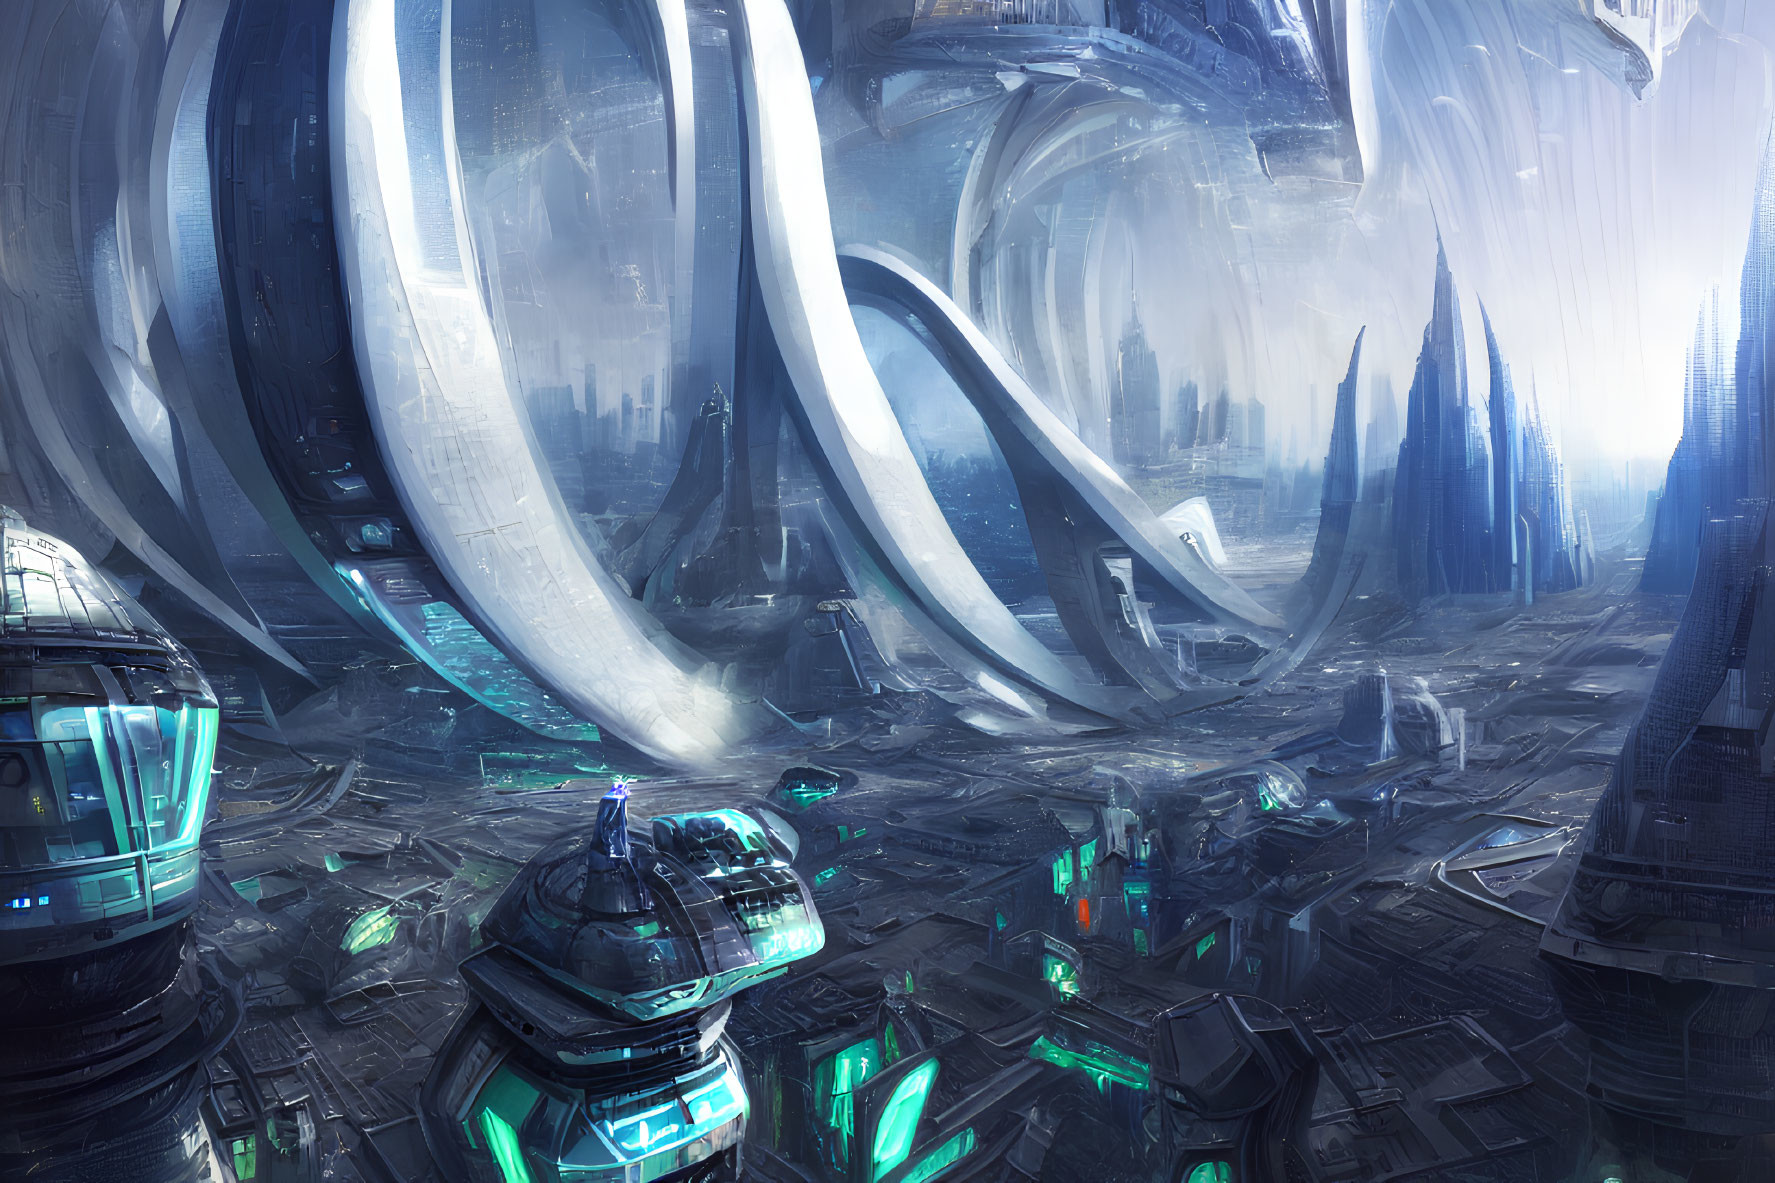 Futuristic cityscape with towering curved structures and advanced buildings illuminated by blue and green lights